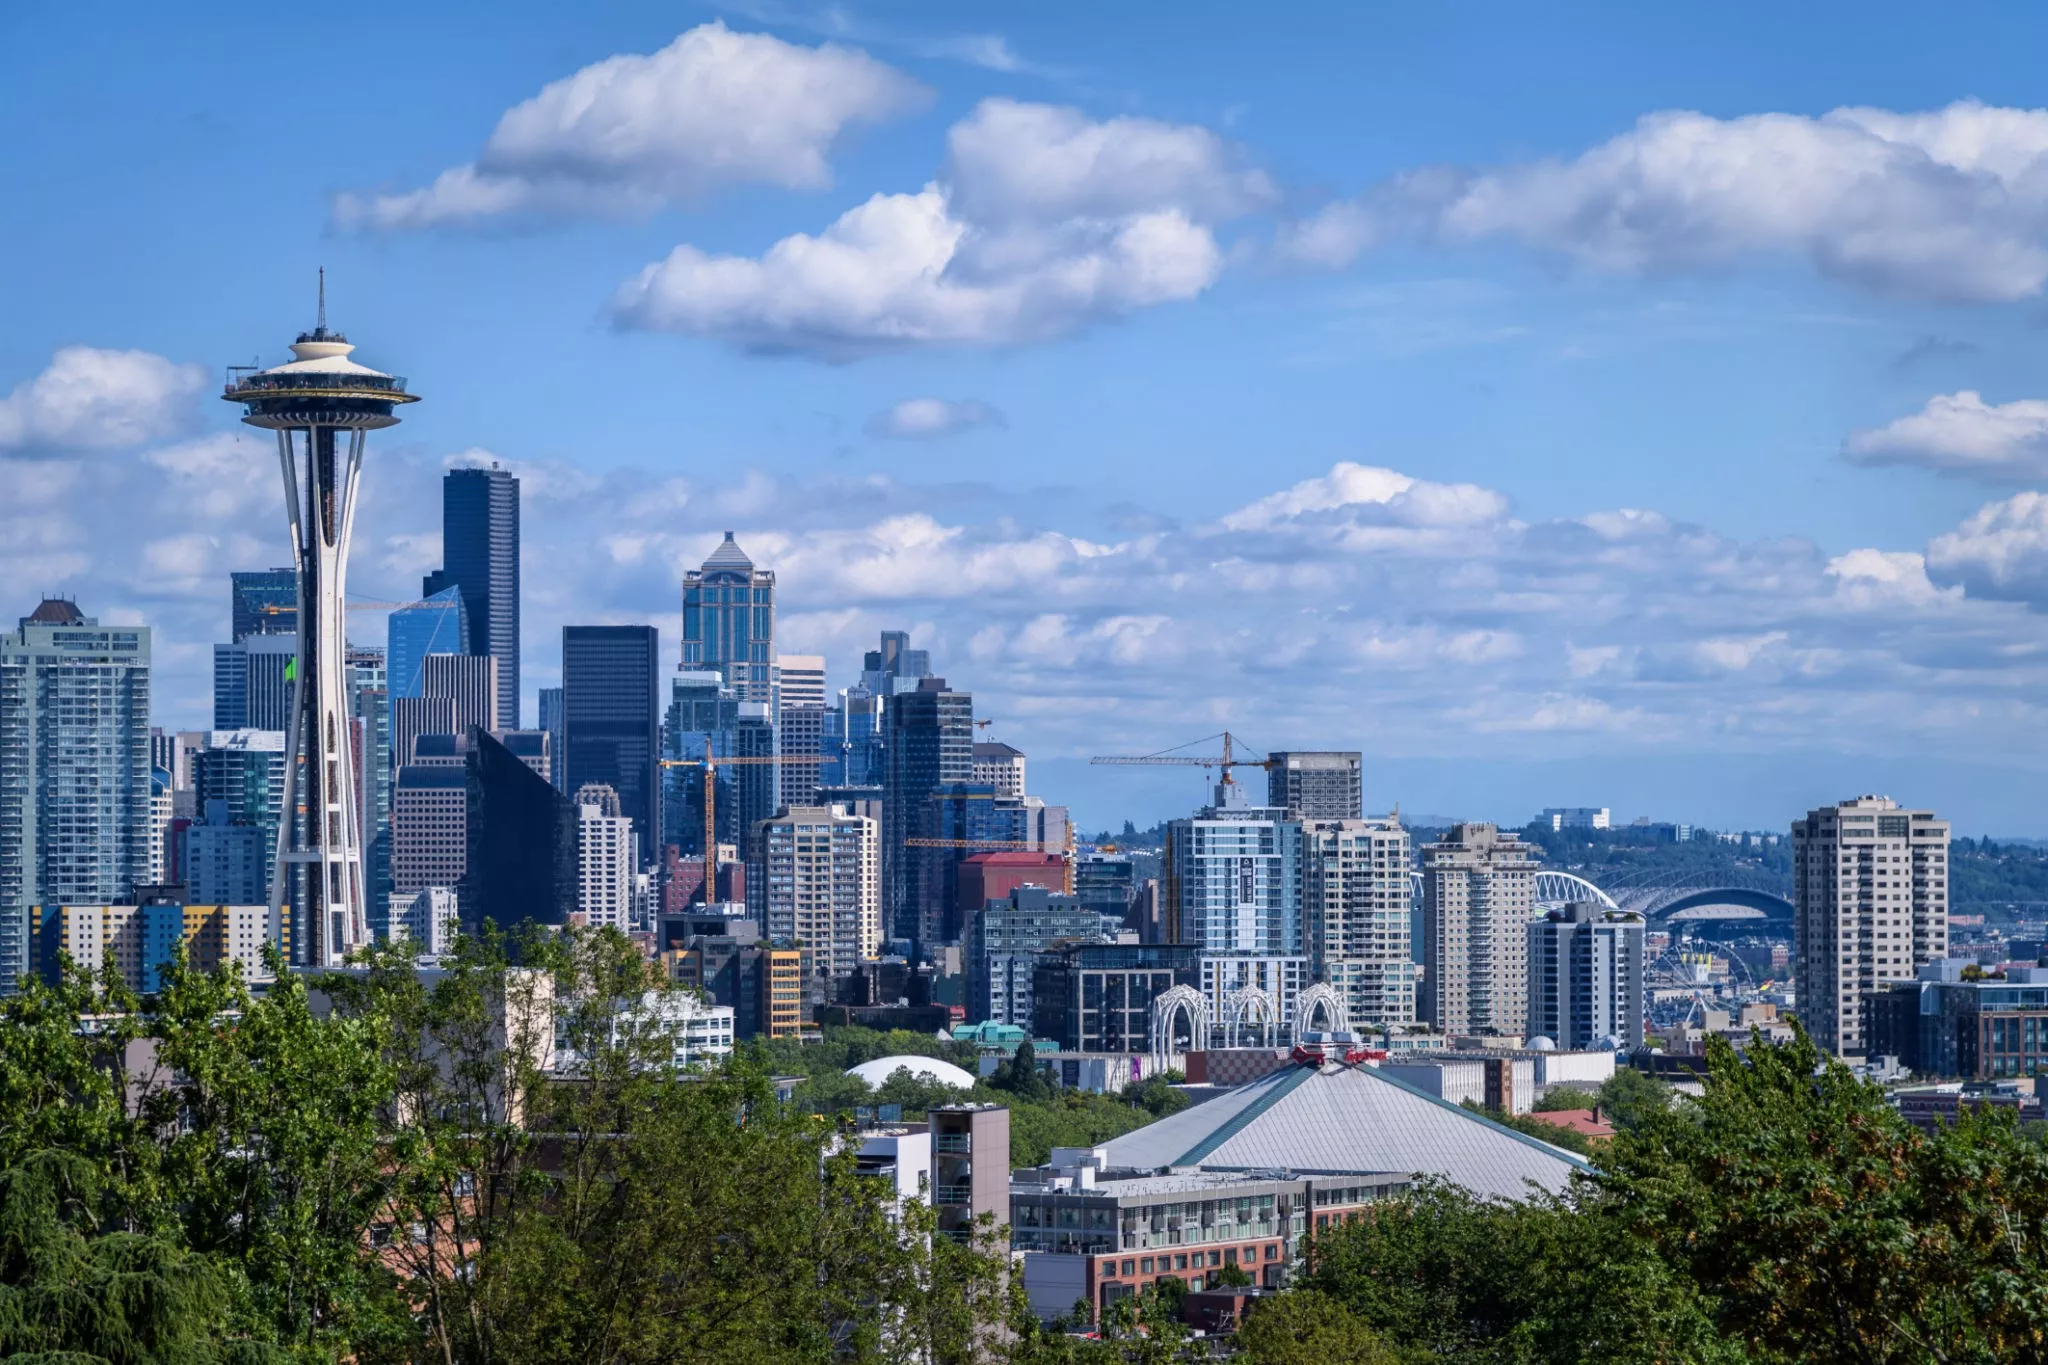 Kerry Park in USA, North America | Parks - Rated 4.1